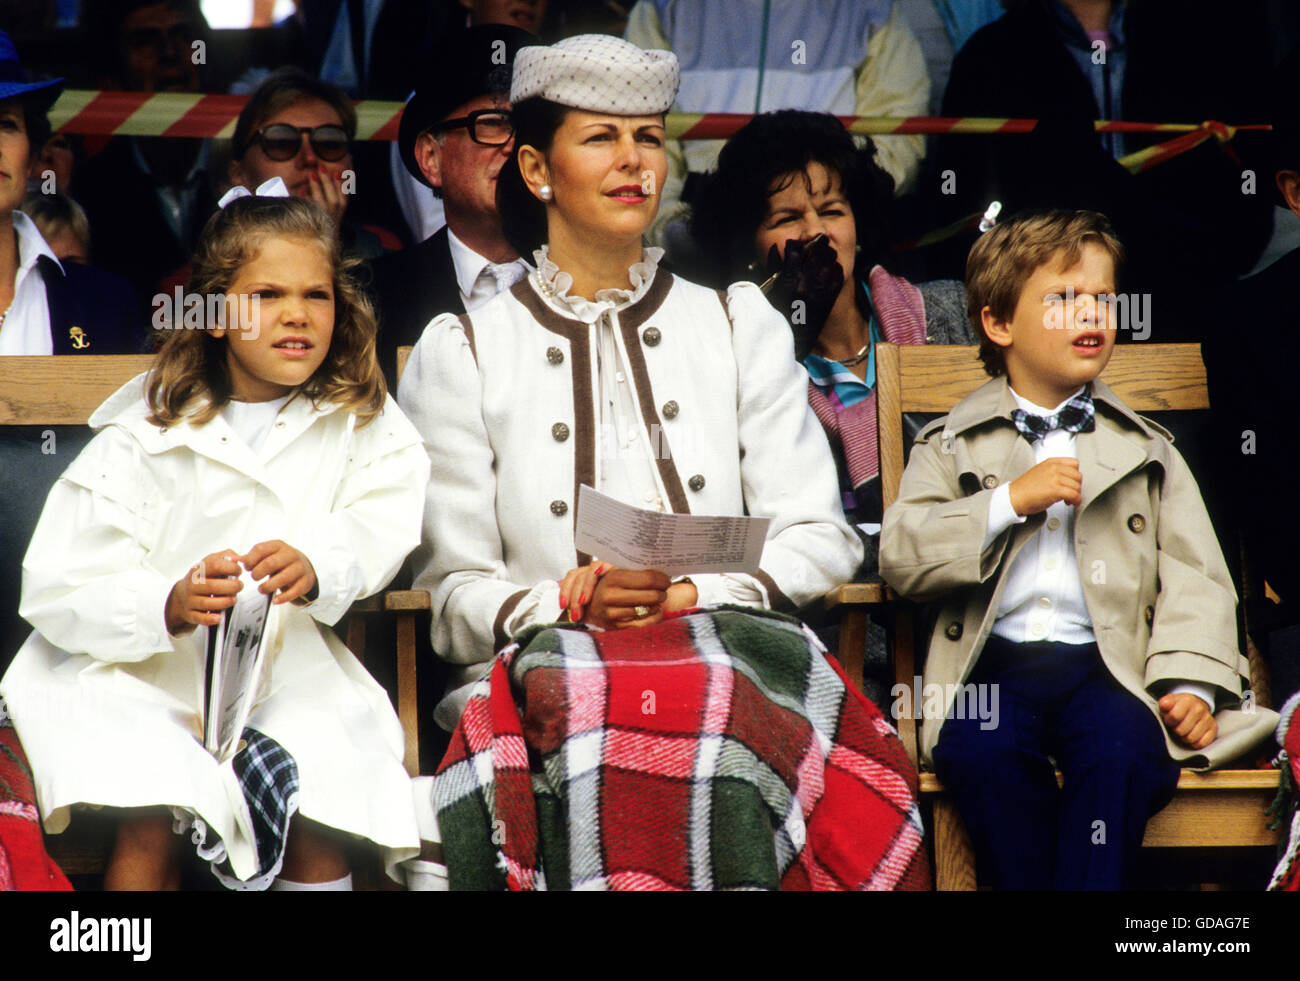 queen-silvia-with-crown-princess-victoria-and-prince-carl-philip-at-GDAG7E.jpg